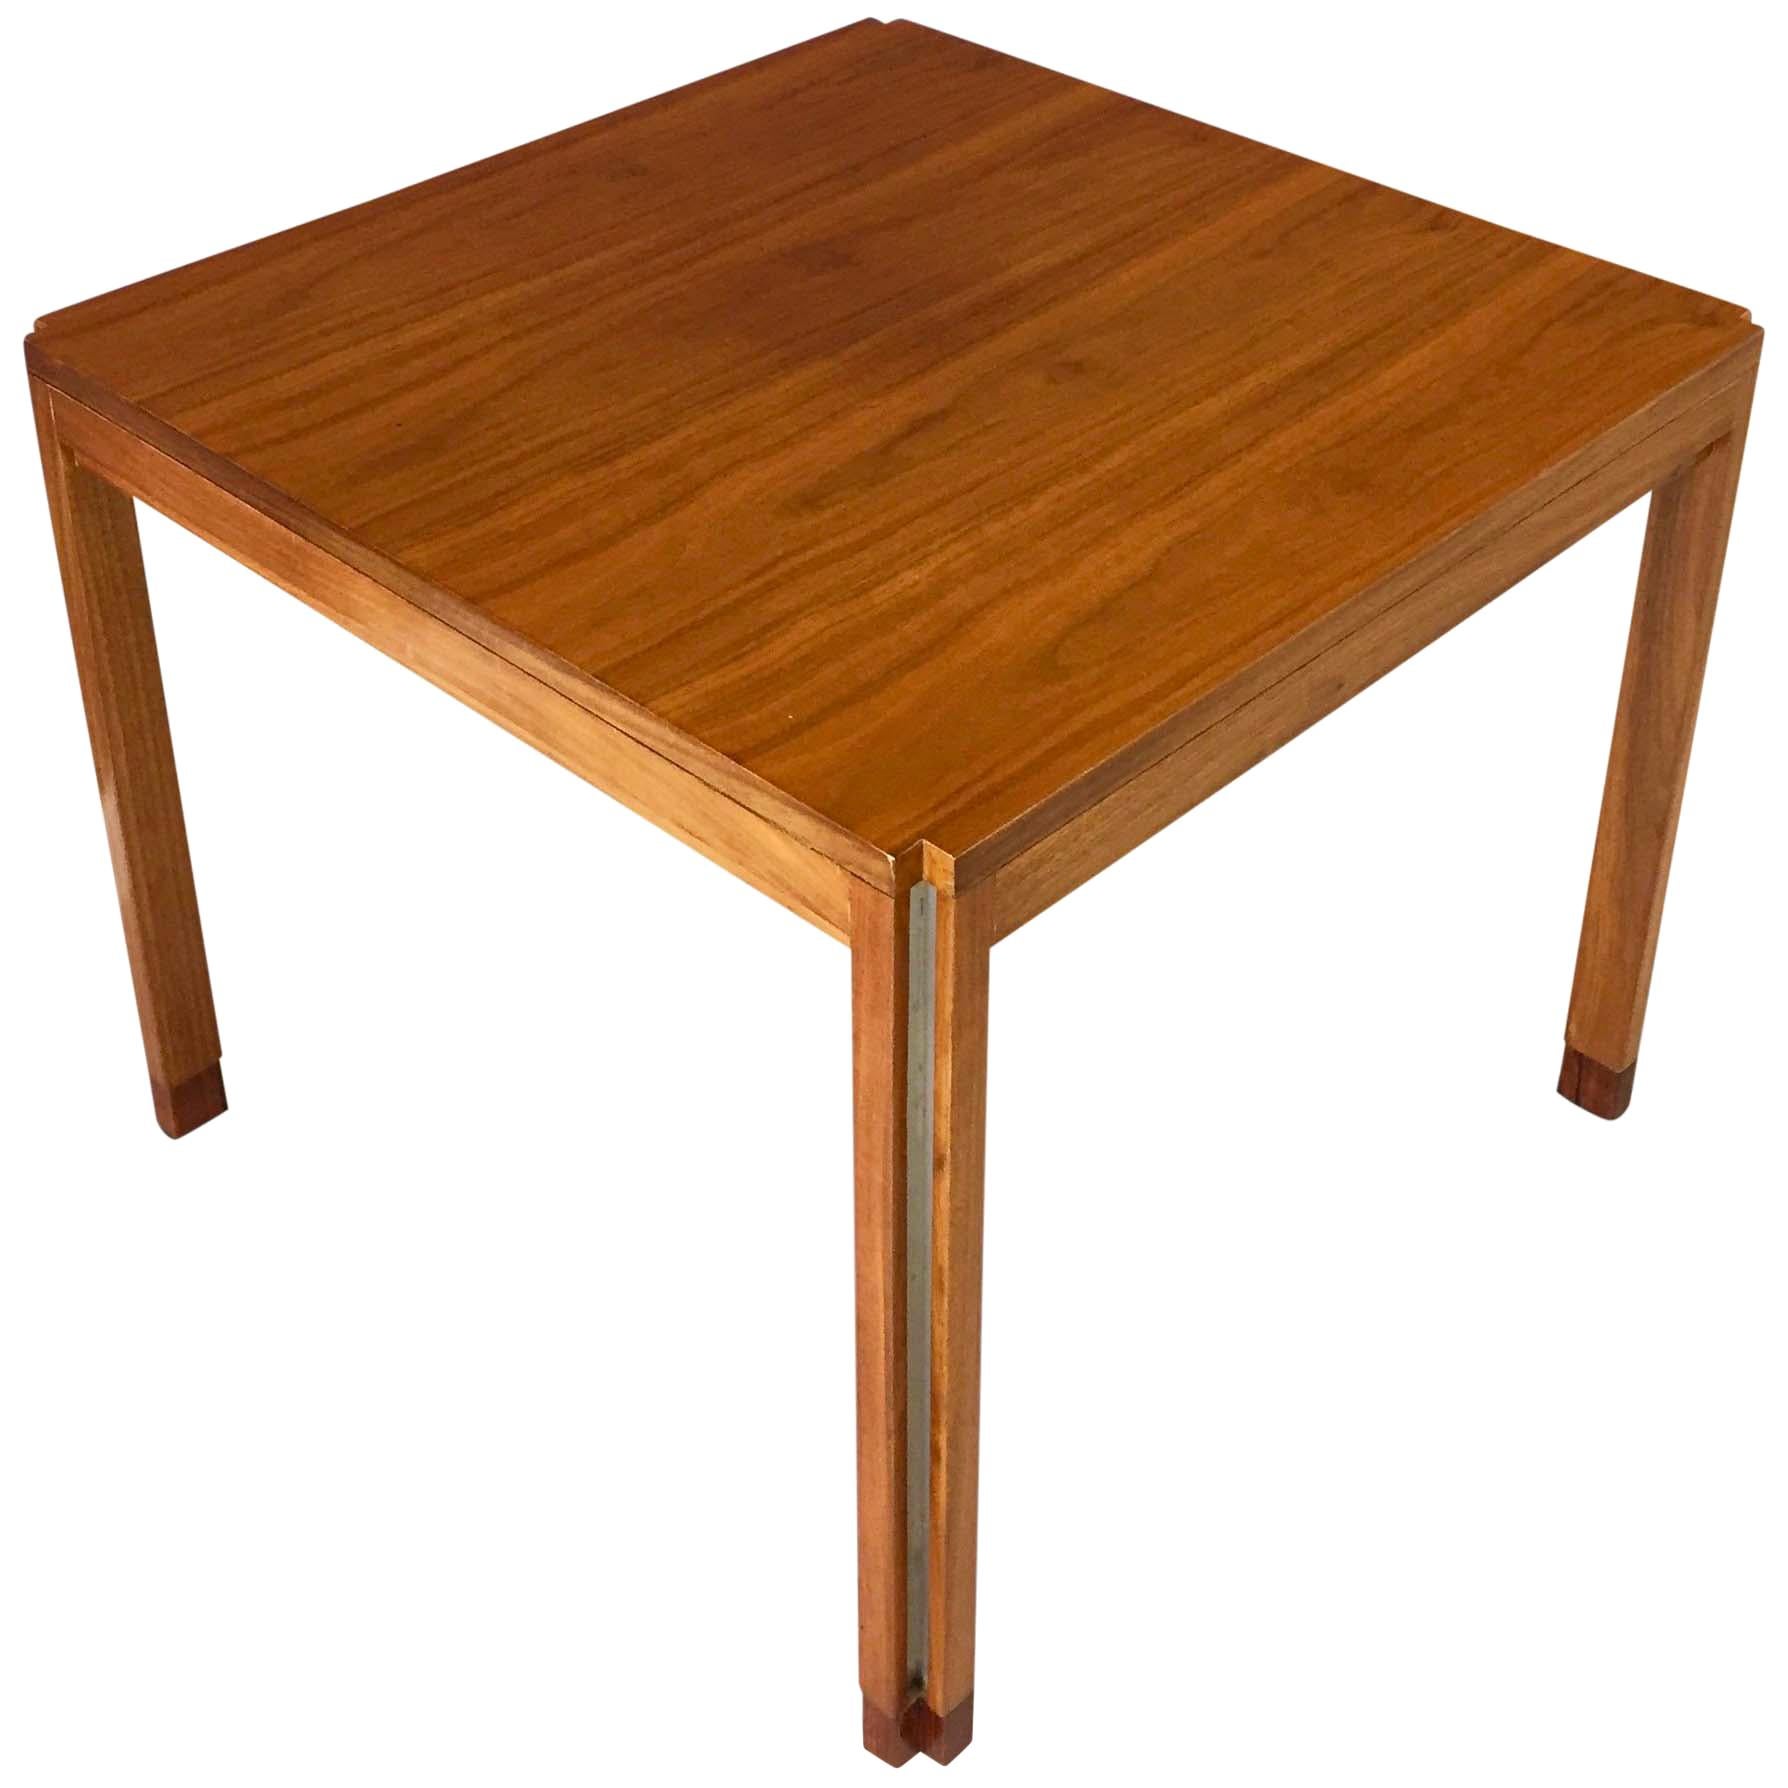 Edward Wormley for Dunbar Walnut Side Table with Rosewood and Aluminium Accents